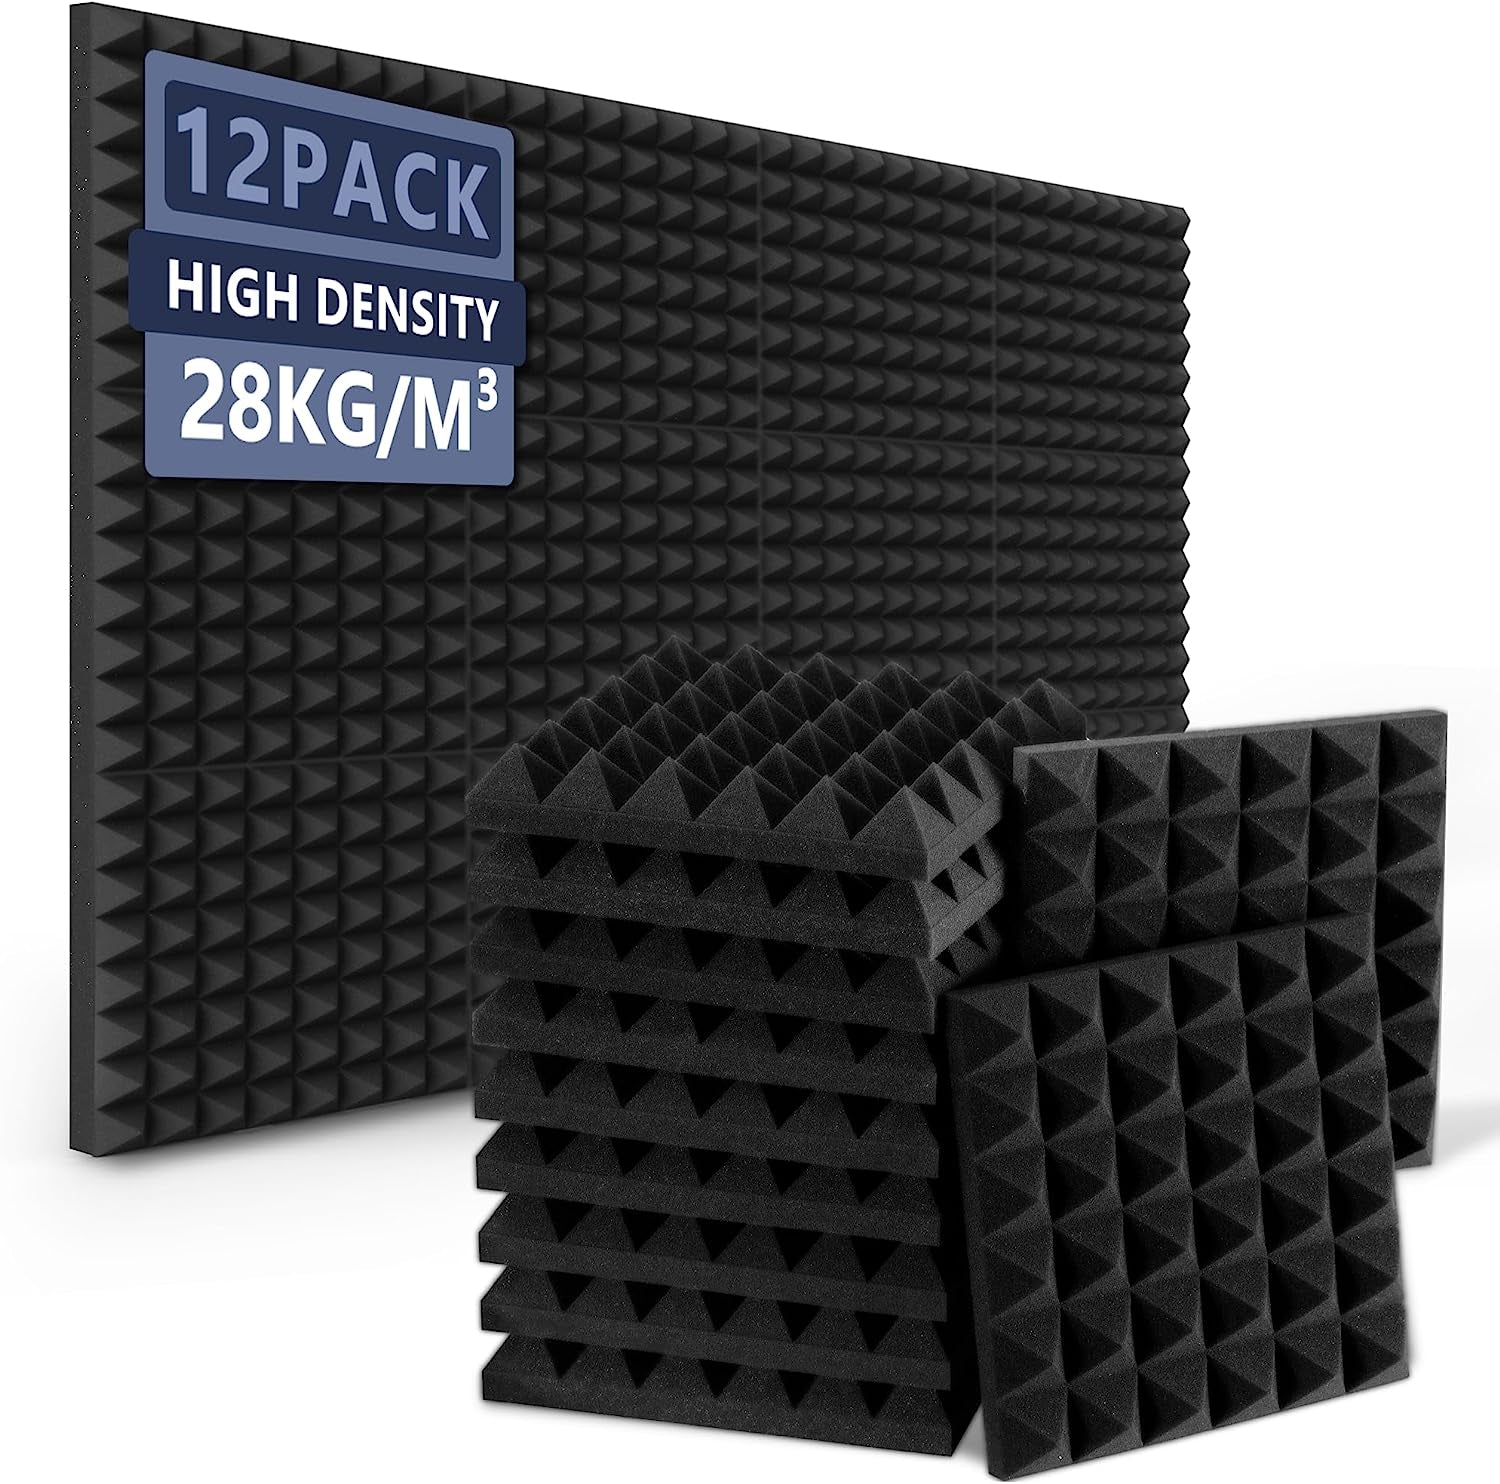 Acoustic Foam Panels (12 Pcs), 12'' X 12" X 2 Inch Thick Pyramid Soundproofing Treatment for Recording Studio, Bedroom Walls - Noise Reduction Panels (Adhesive Not Included)